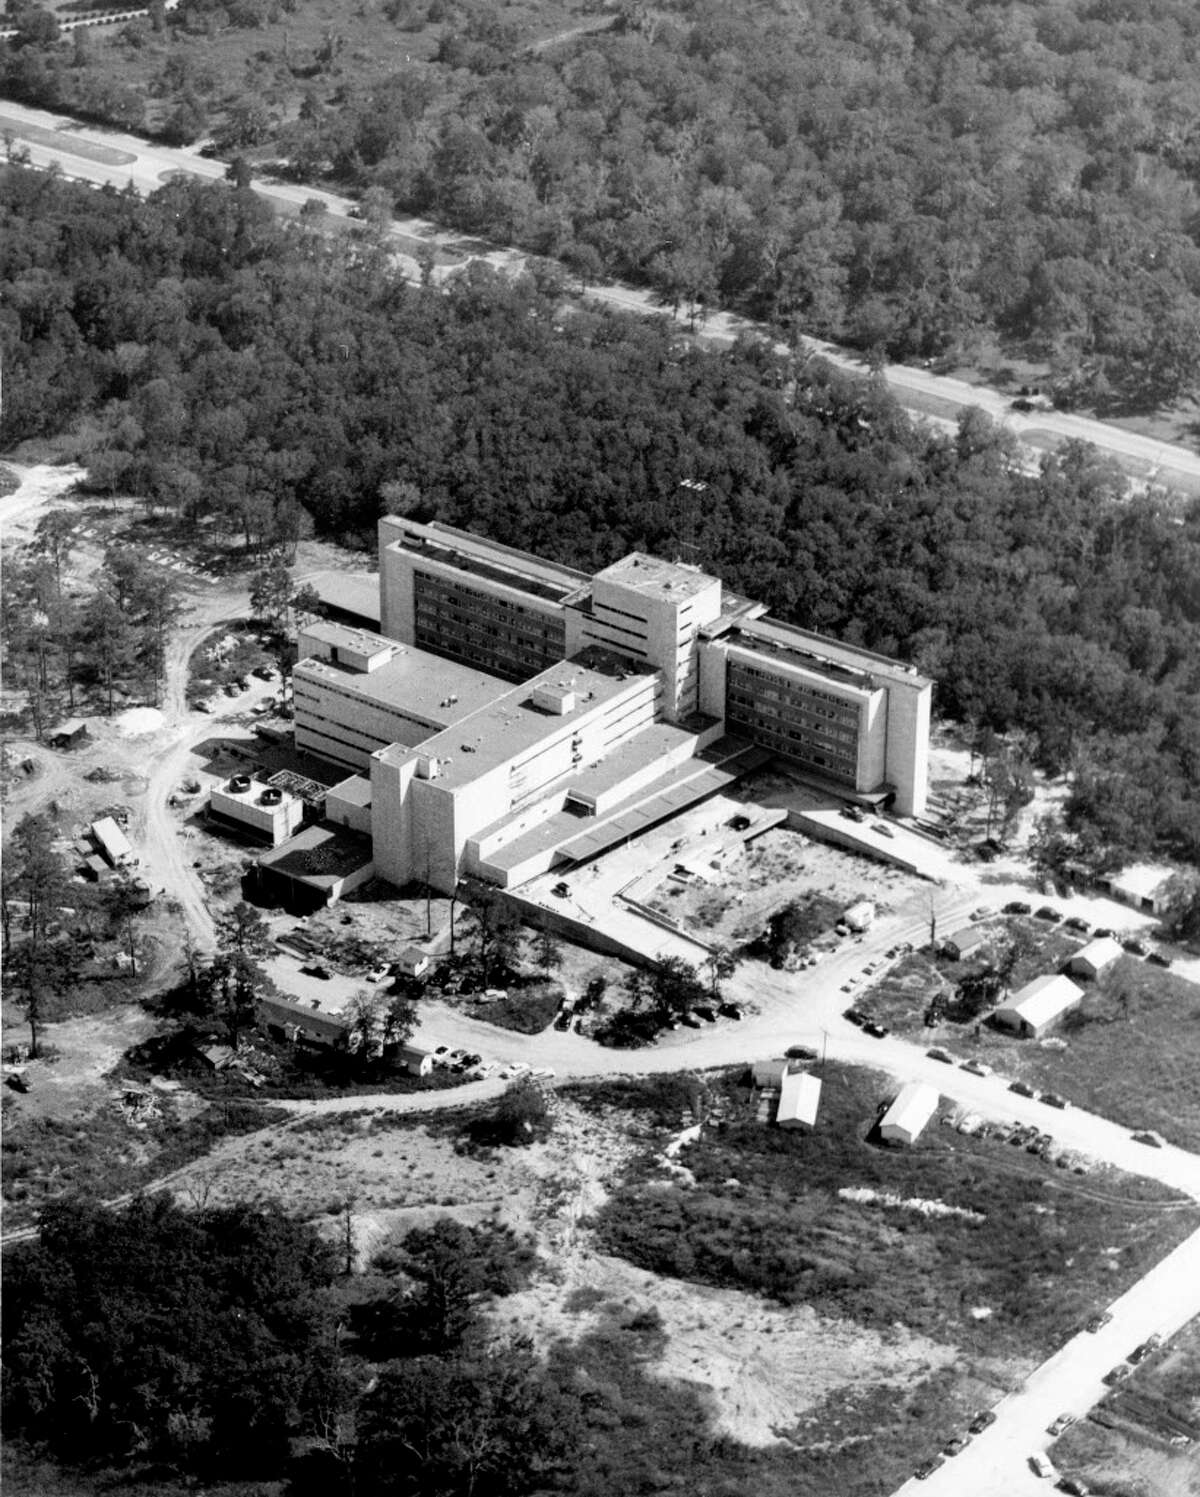 Construction of MD Anderson Hospital for Cancer Research was ongoing in 1952. The school opened its new center in 1954, when 46 patients were moved in from its original facility.